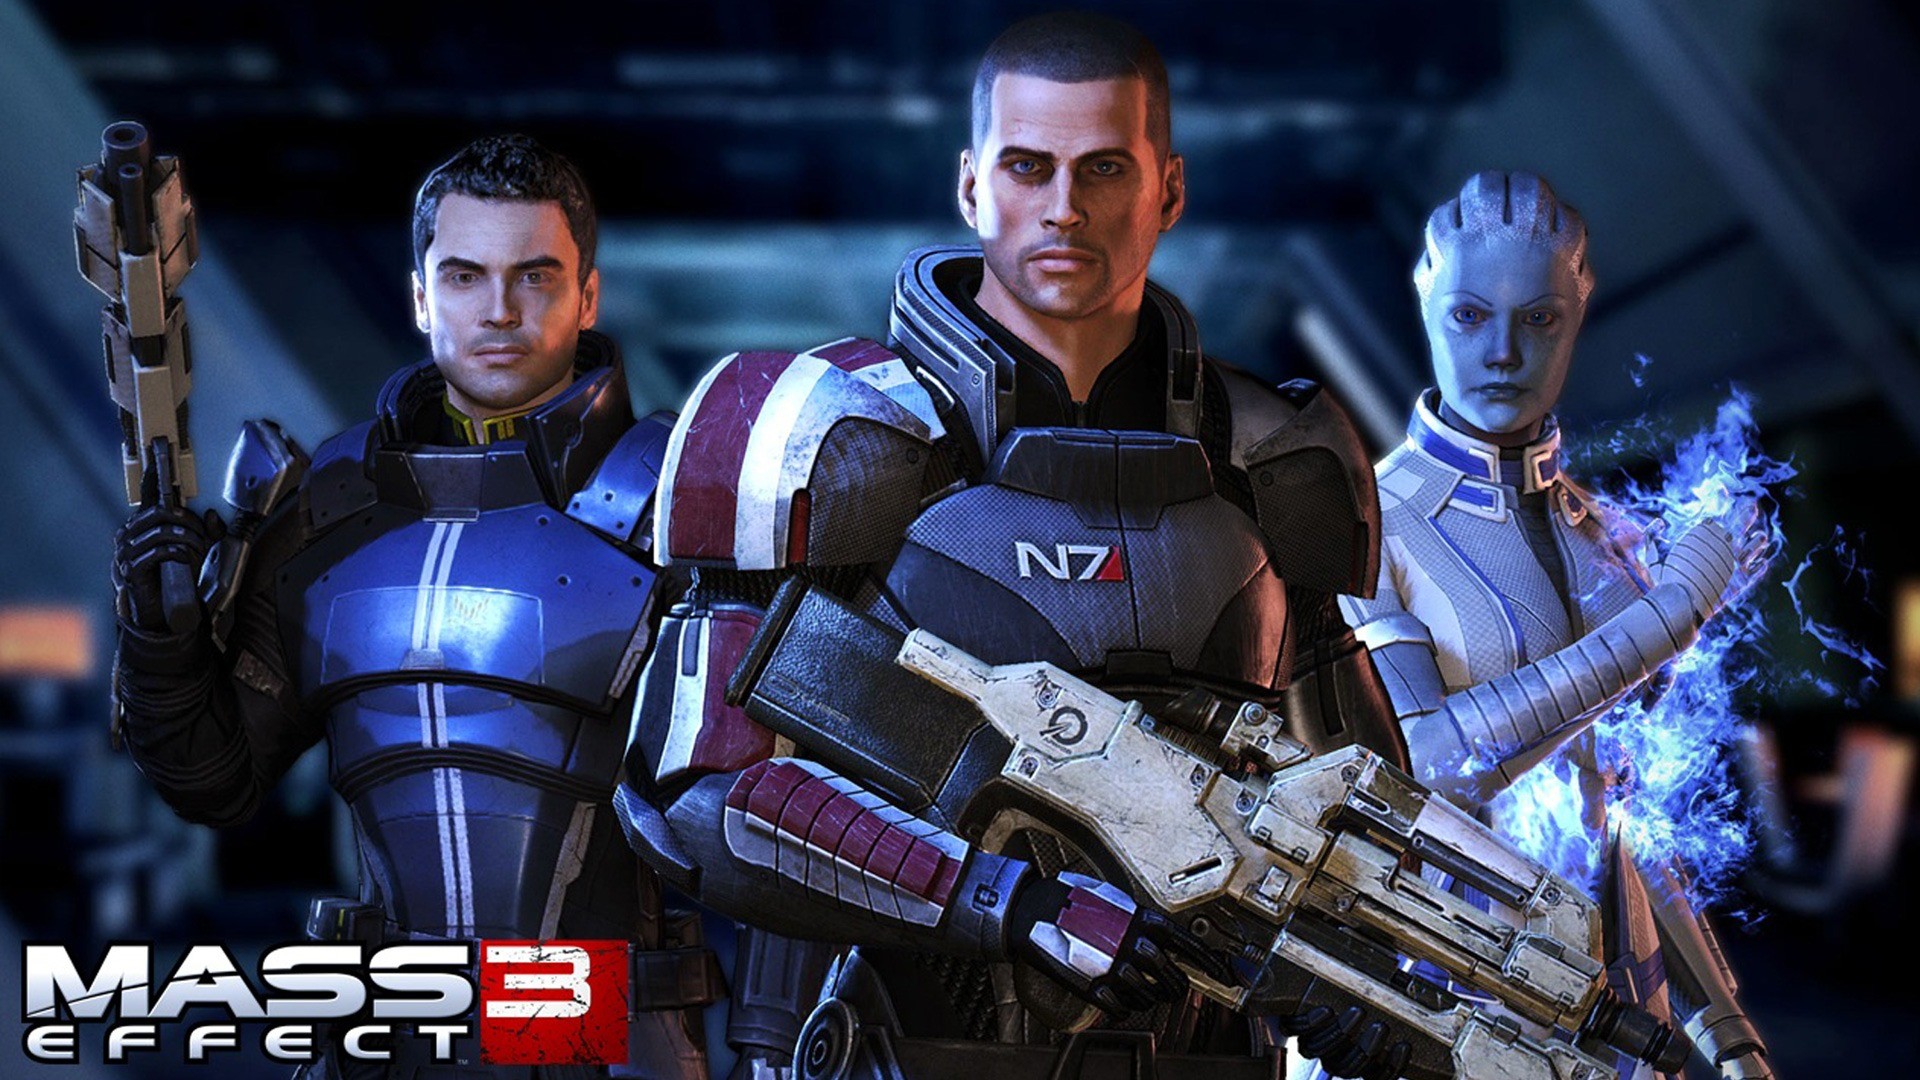 1920x1080 Mass Effect 1 Wallpapers Wallpapers) – Adorable Wallpapers